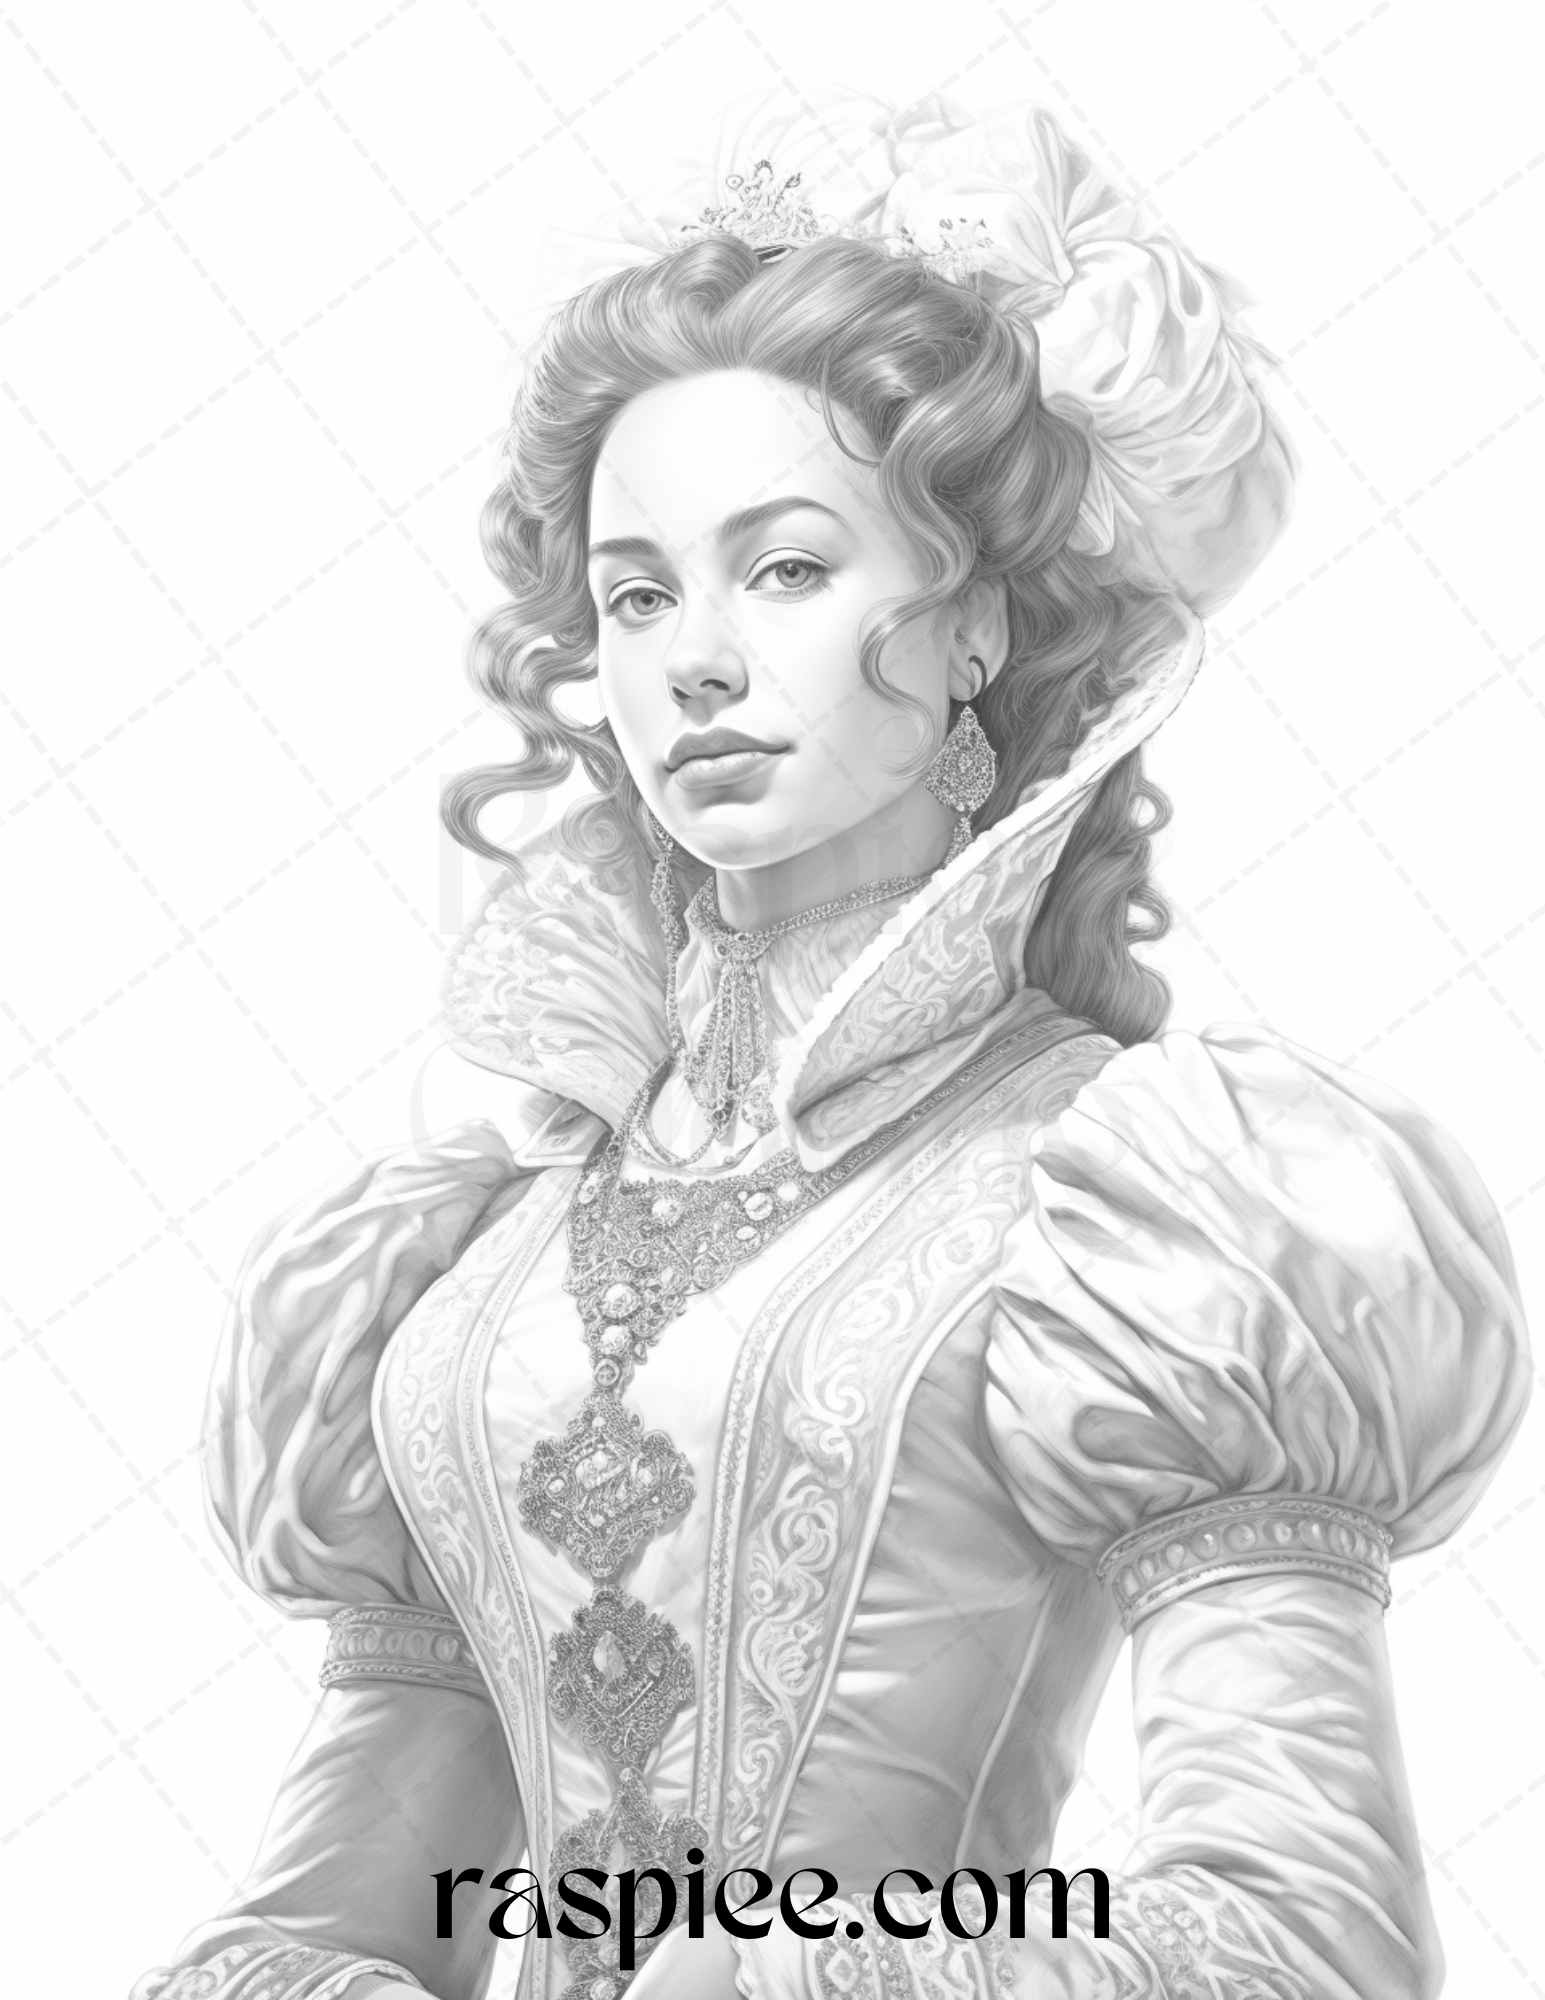 40 Baroque Women Portrait Grayscale Adult Coloring Pages Printable, PDF File Instant Download - Raspiee Coloring